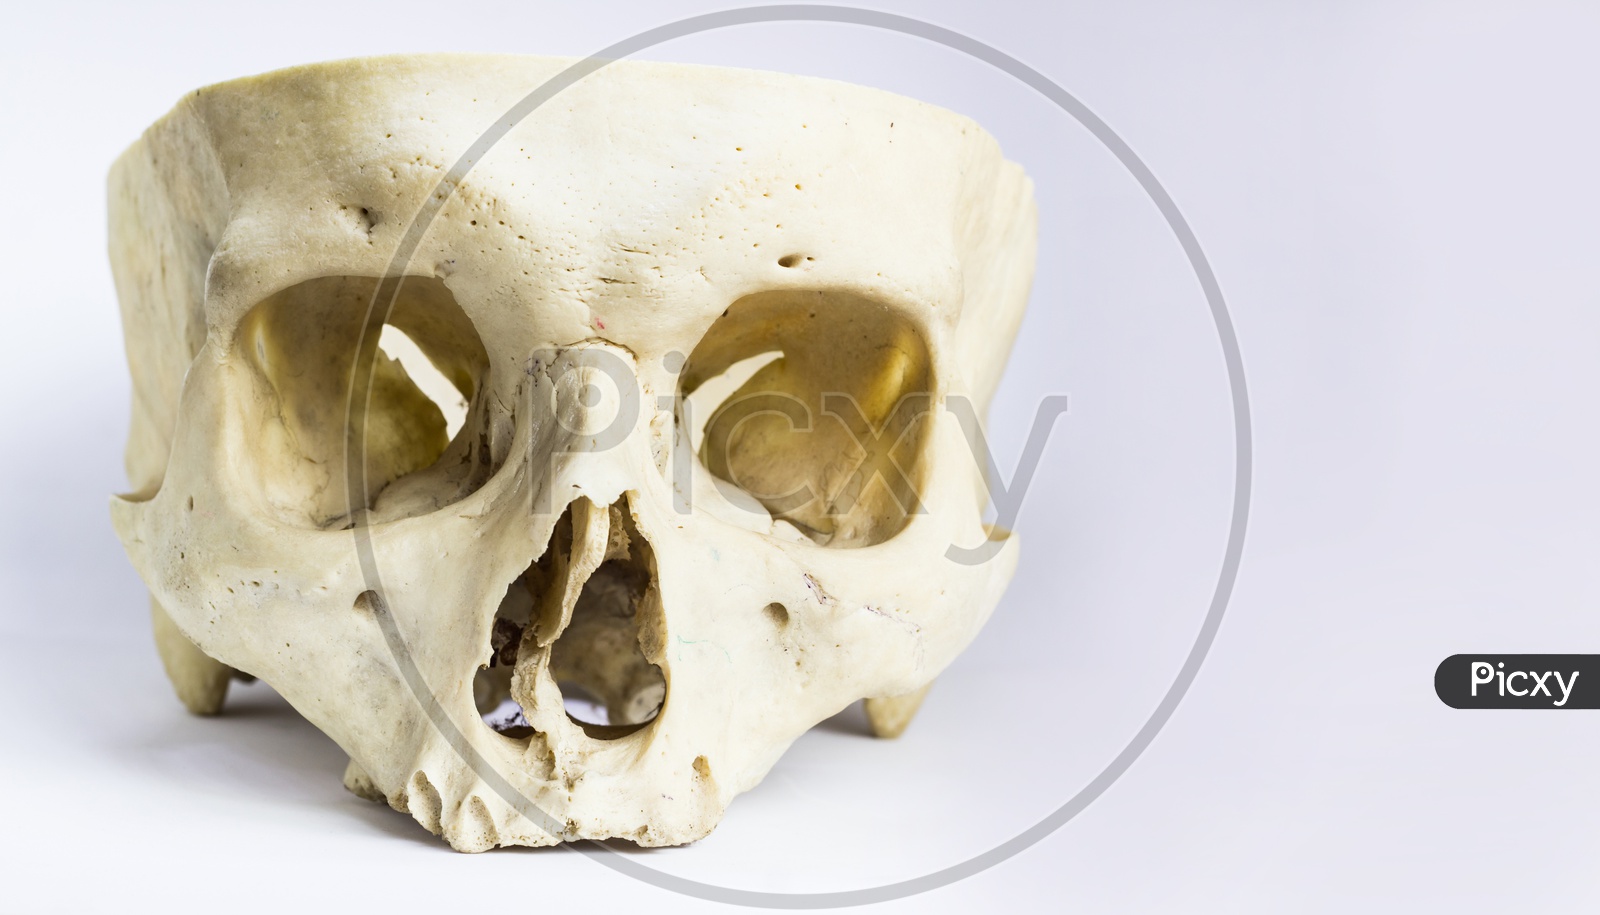 Front Anatomical View Of Human Skull Bone Without The Vault Of The Skull And Mandible In Isolated White Background